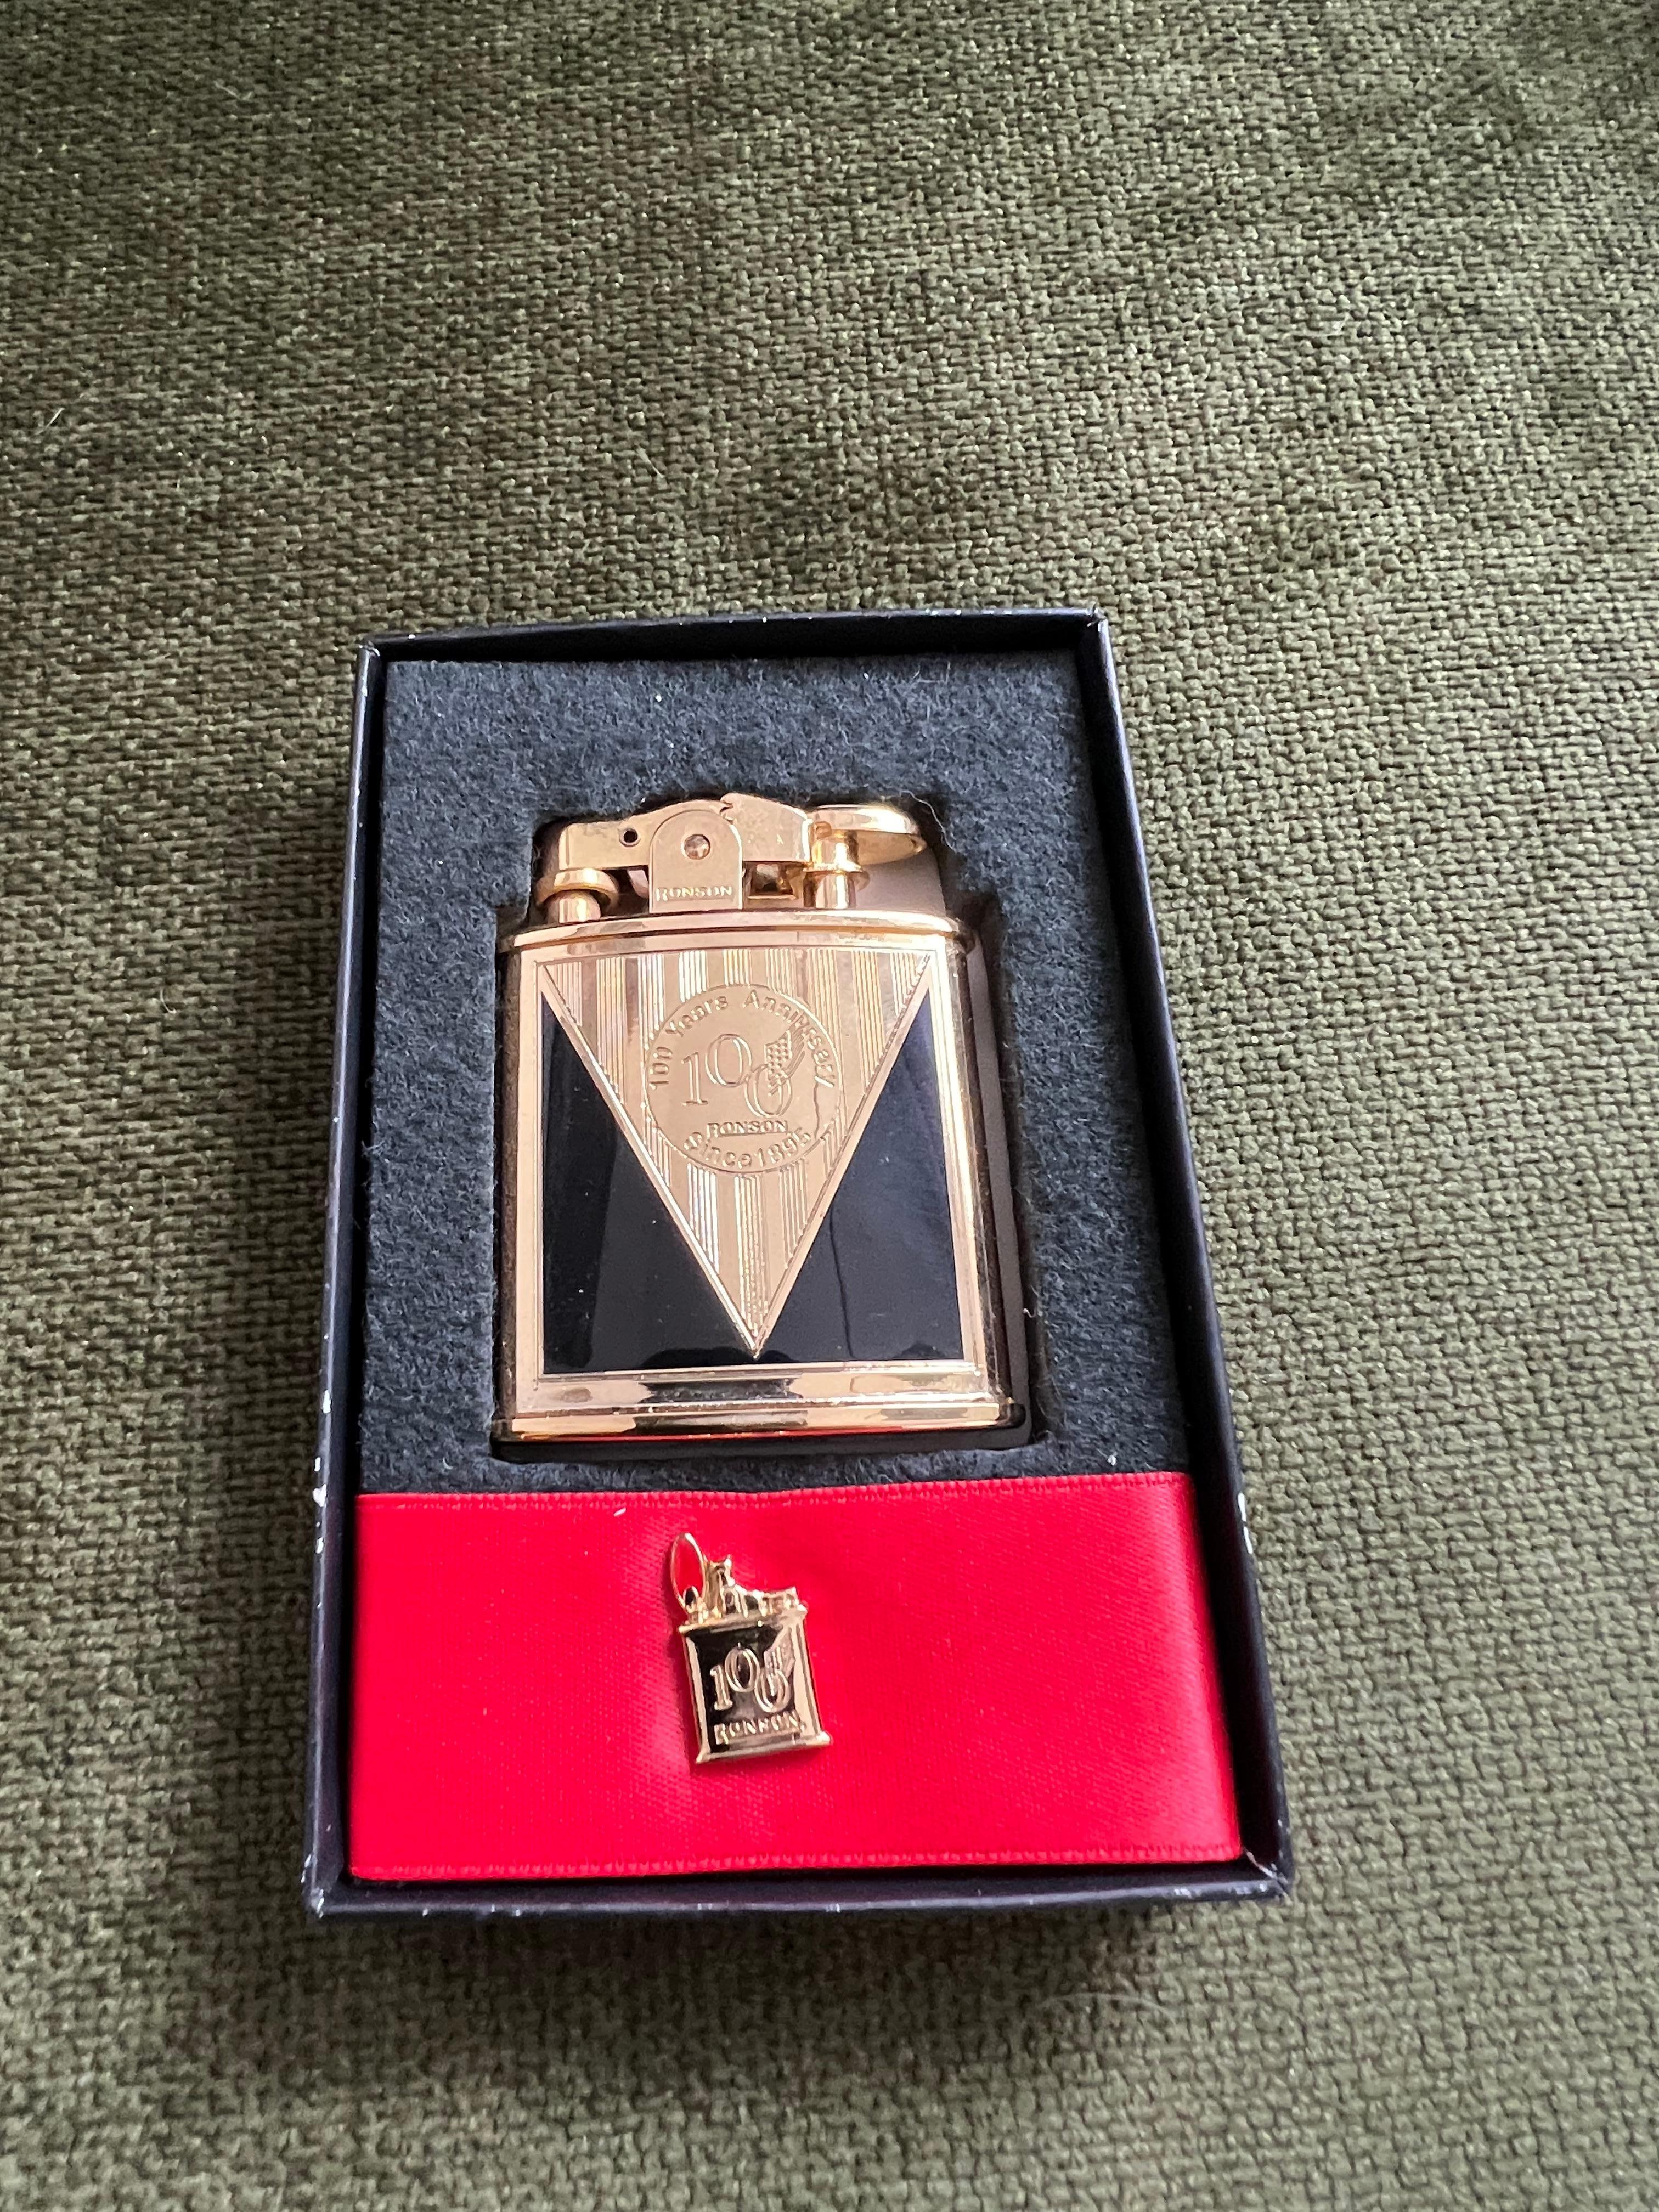 Gold Plated “1943” Ronson Lighter, Rare Limited 100 Year Anniversary Edition For Sale 4